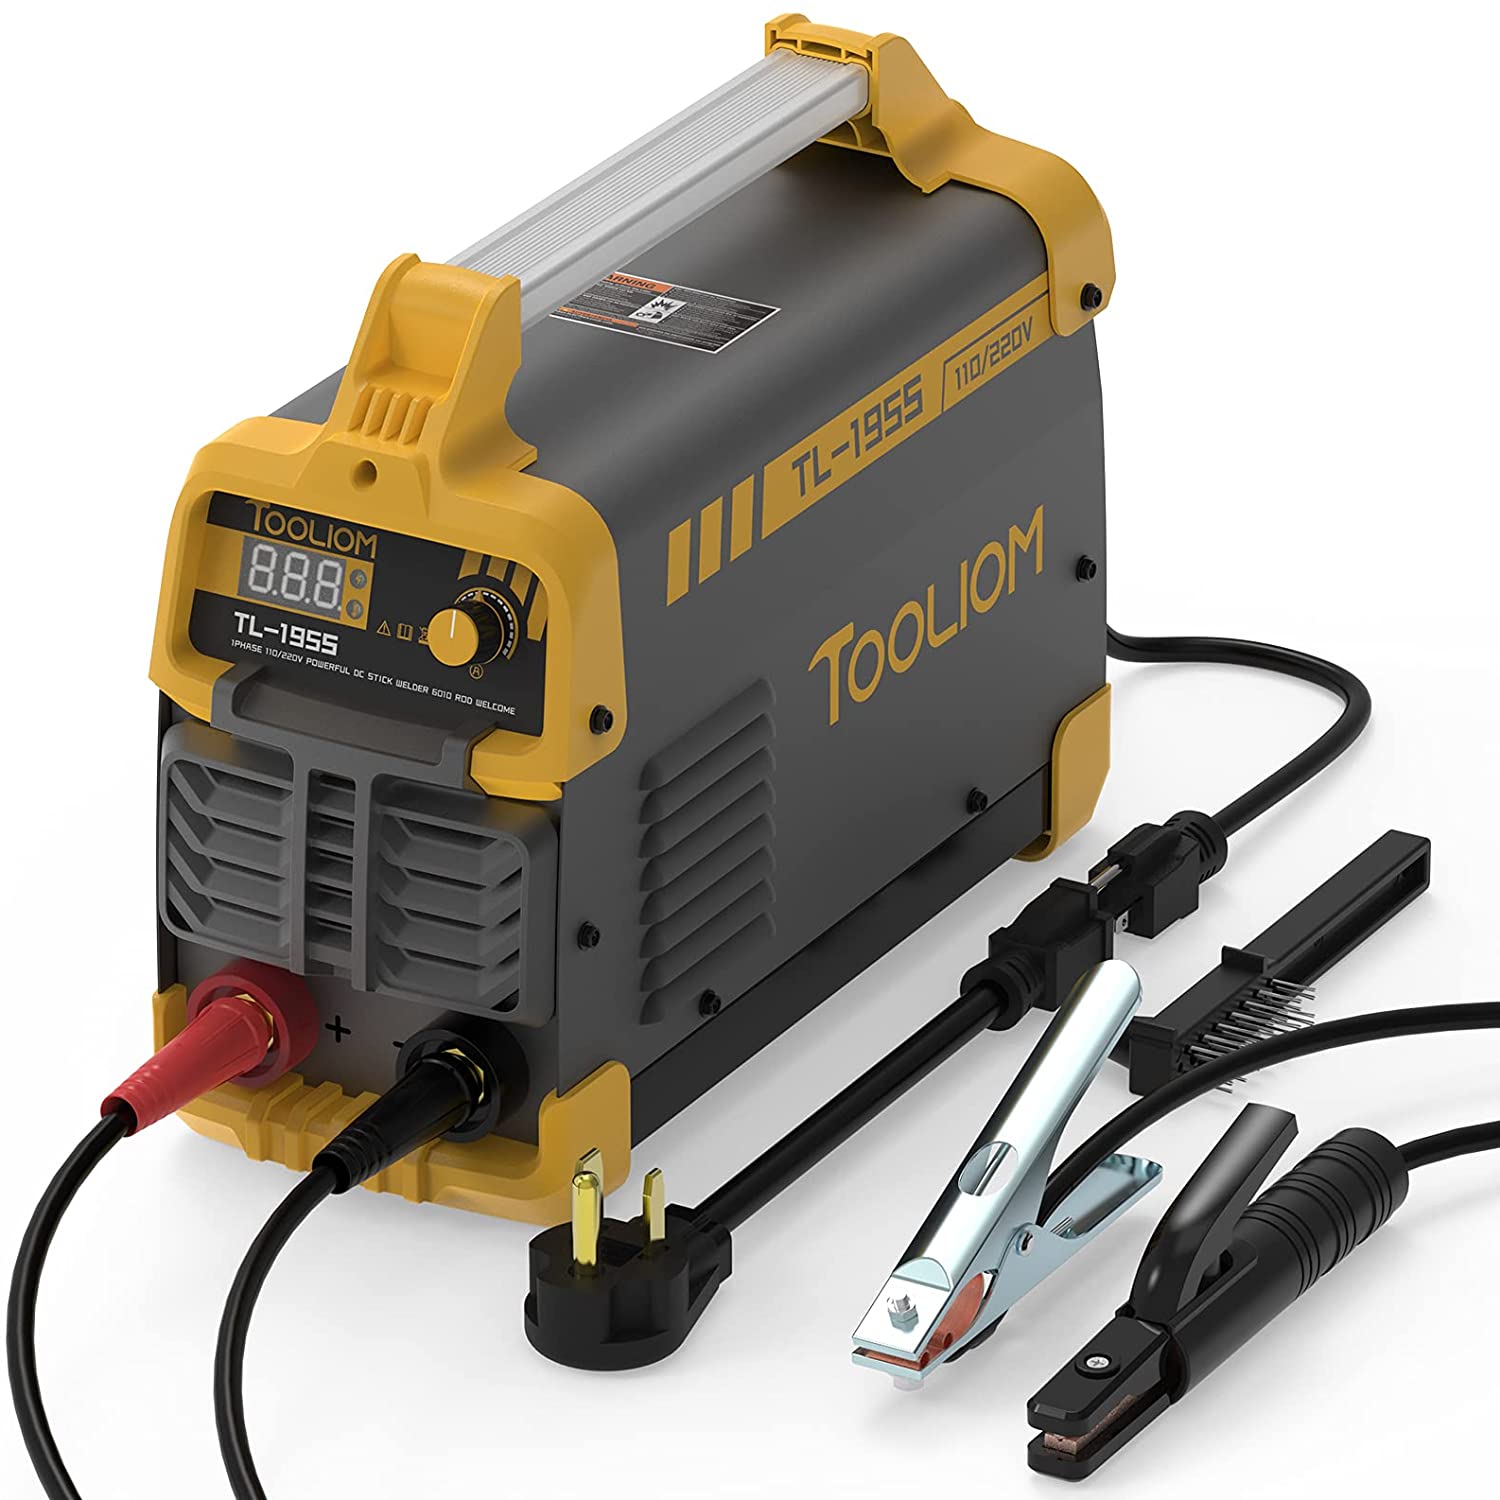 The Forney Easy Weld 298 90-amp Arc Welder is the best choice if you’re on a low budget but still want a decent stick welder for light welding. It’s not designed for workshop use, but if you don’t need more than ninety amps to work with, it will serve any hobbyist well.  You also want to use rods ?-inch in diameter or smaller as it won’t weld with anything bigger. Needing to keep within these parameters is really the only downside to owning it. But if you keep within its limitations, it’s an excellent little welder to get household jobs done on.  The 298 is a light, portable machine that can be carried easily into any spot you need to weld. There’s a good range of adjustment for light welding, and it’s got excellent safety features similar to a bigger, more elite stick welder. This machine provides excellent bang for your buck, and we highly recommend it.  Pros Low price Simple to use Quality machine Portable Cons Welds a little cold